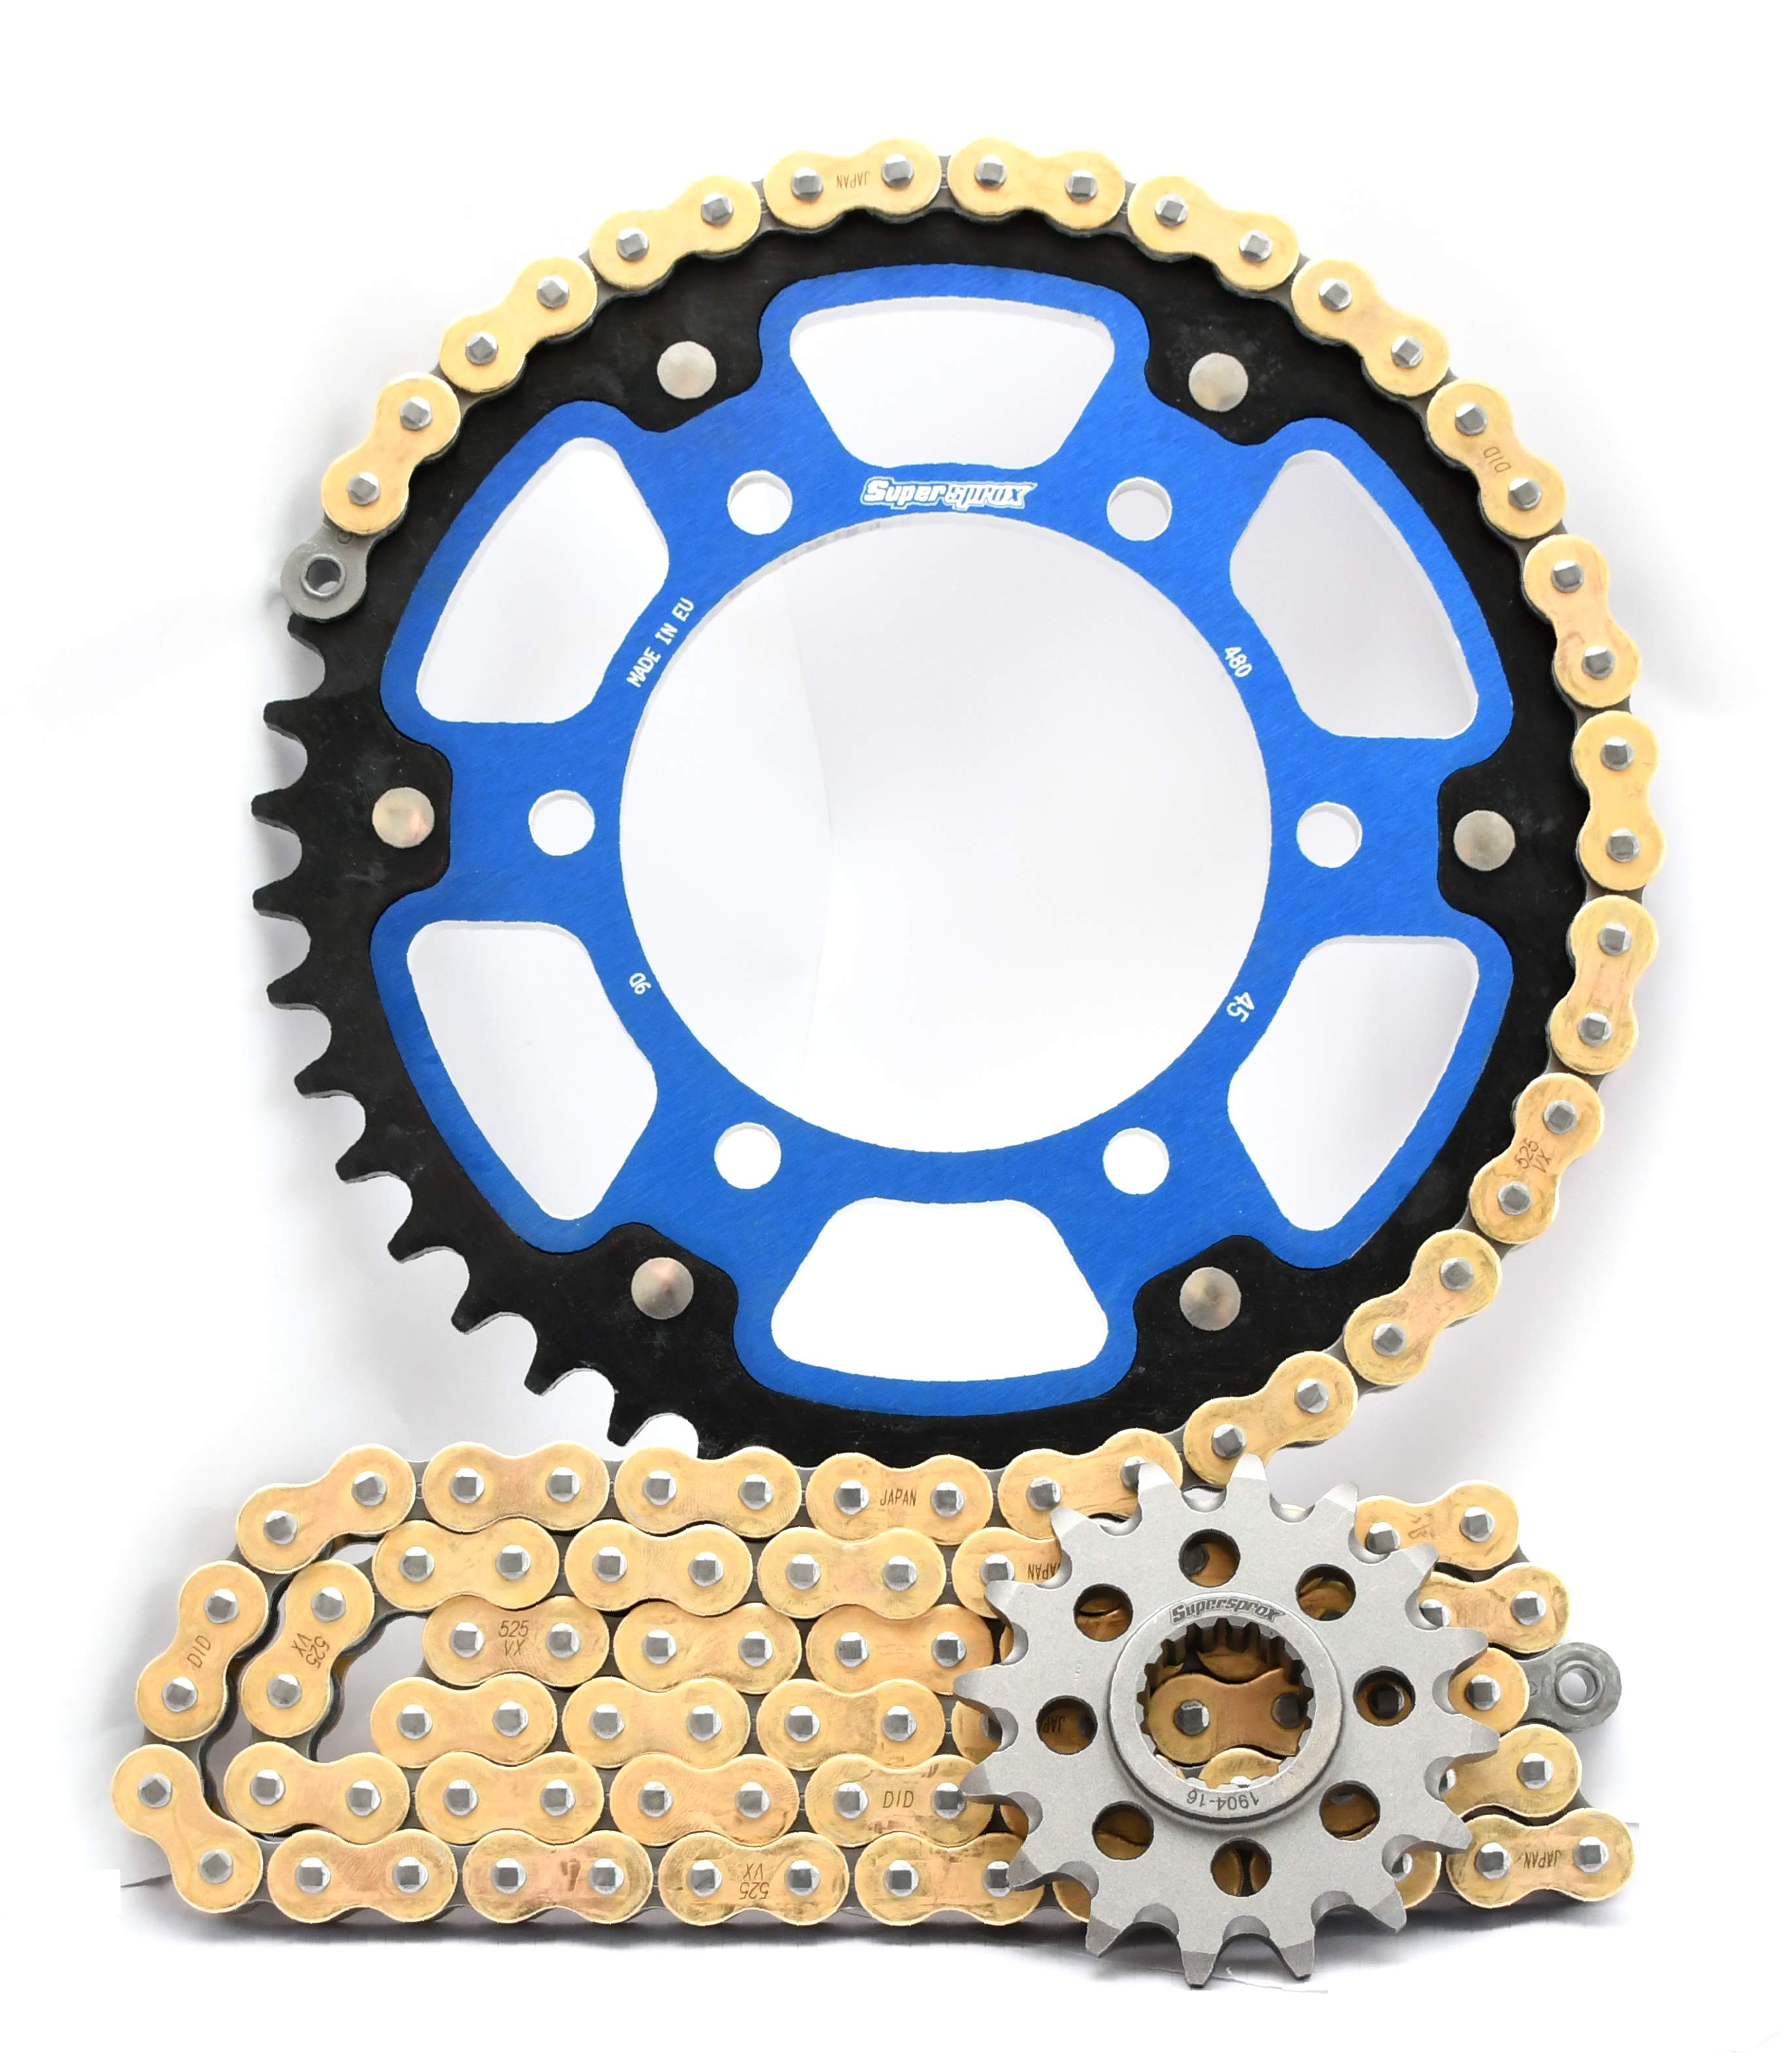 Supersprox Chain & Sprocket Kit for Yamaha Tenere 700 2019> - Standard Gearing - 0